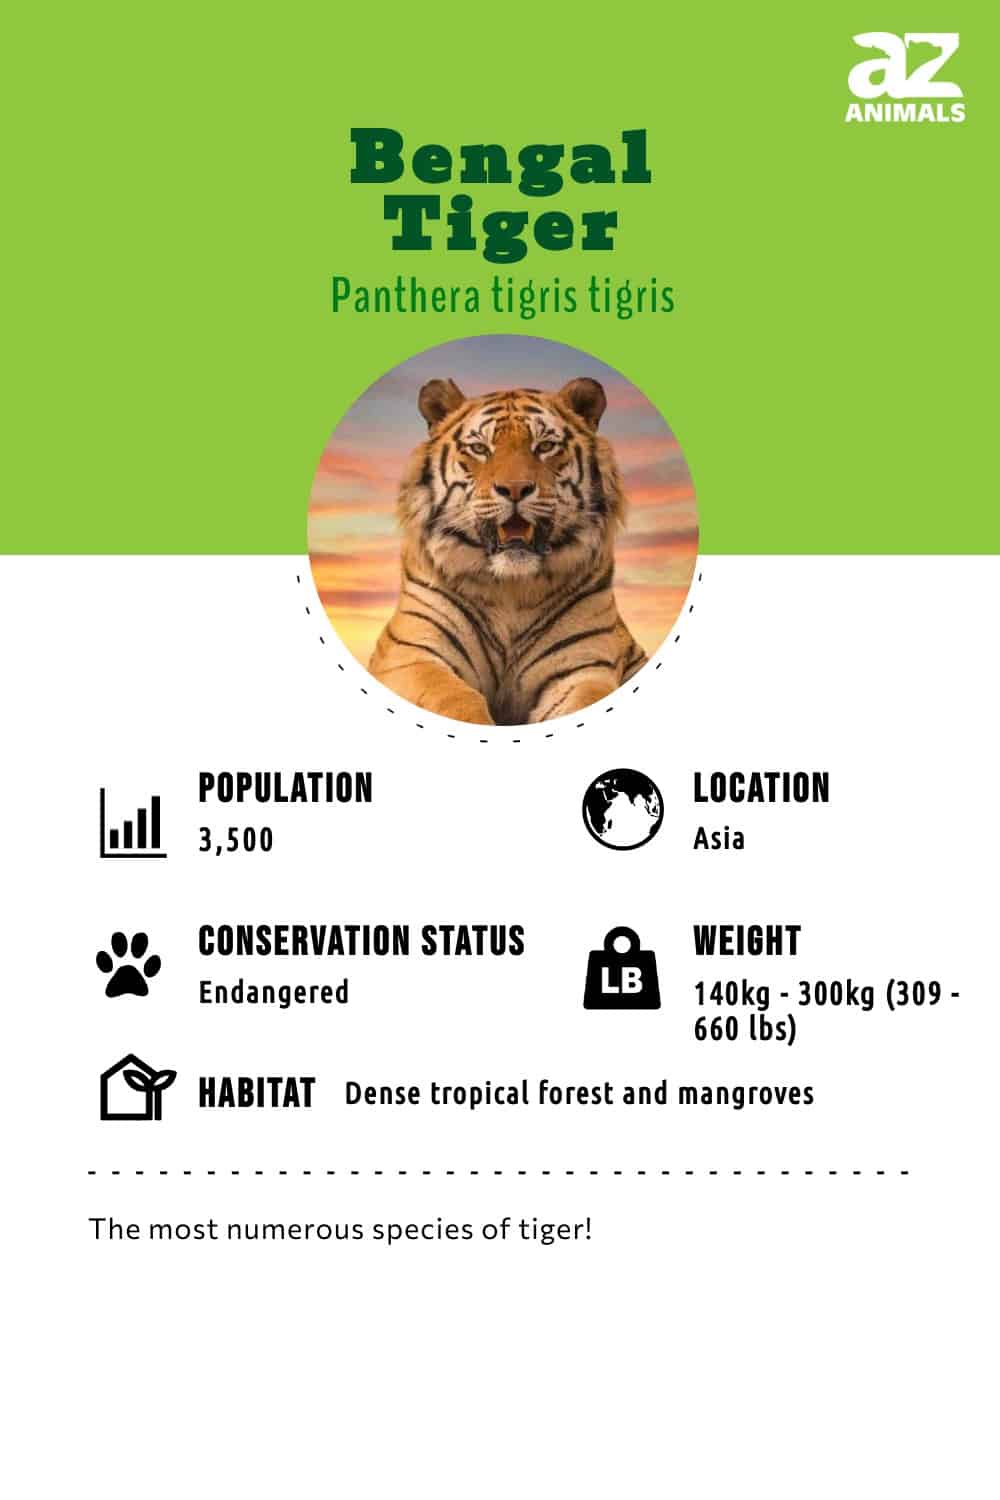 Amazing Facts about Bengal Tigers